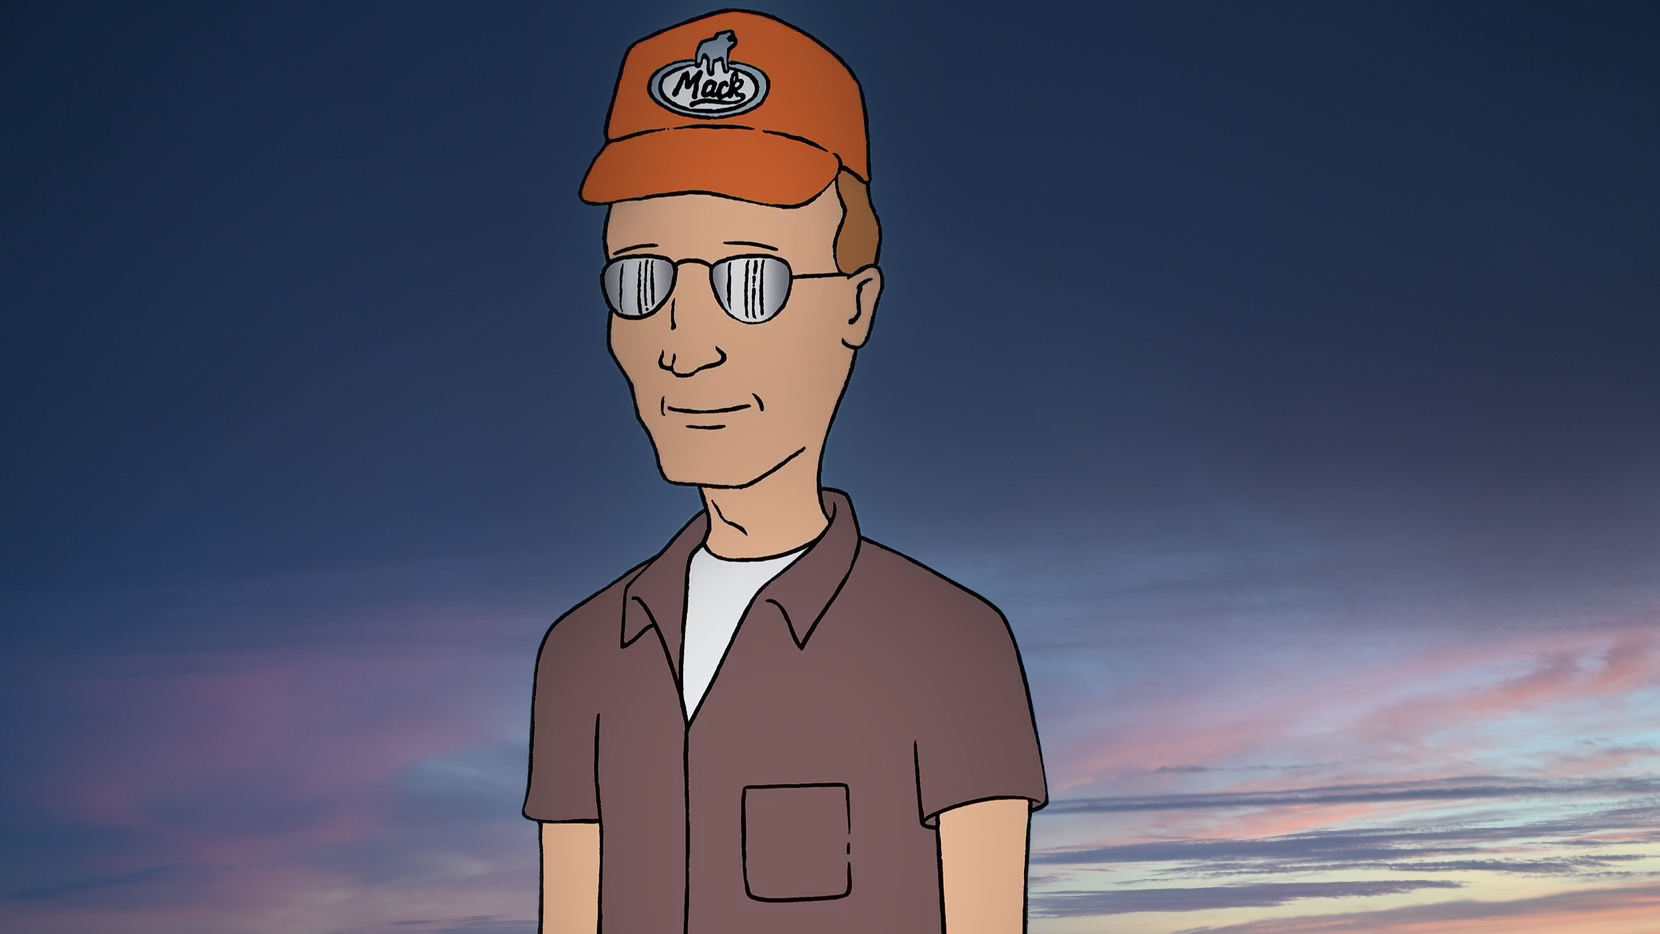 Johnny Hardwick, voice of Dale Gribble on 'King of the Hill,' dies at 64